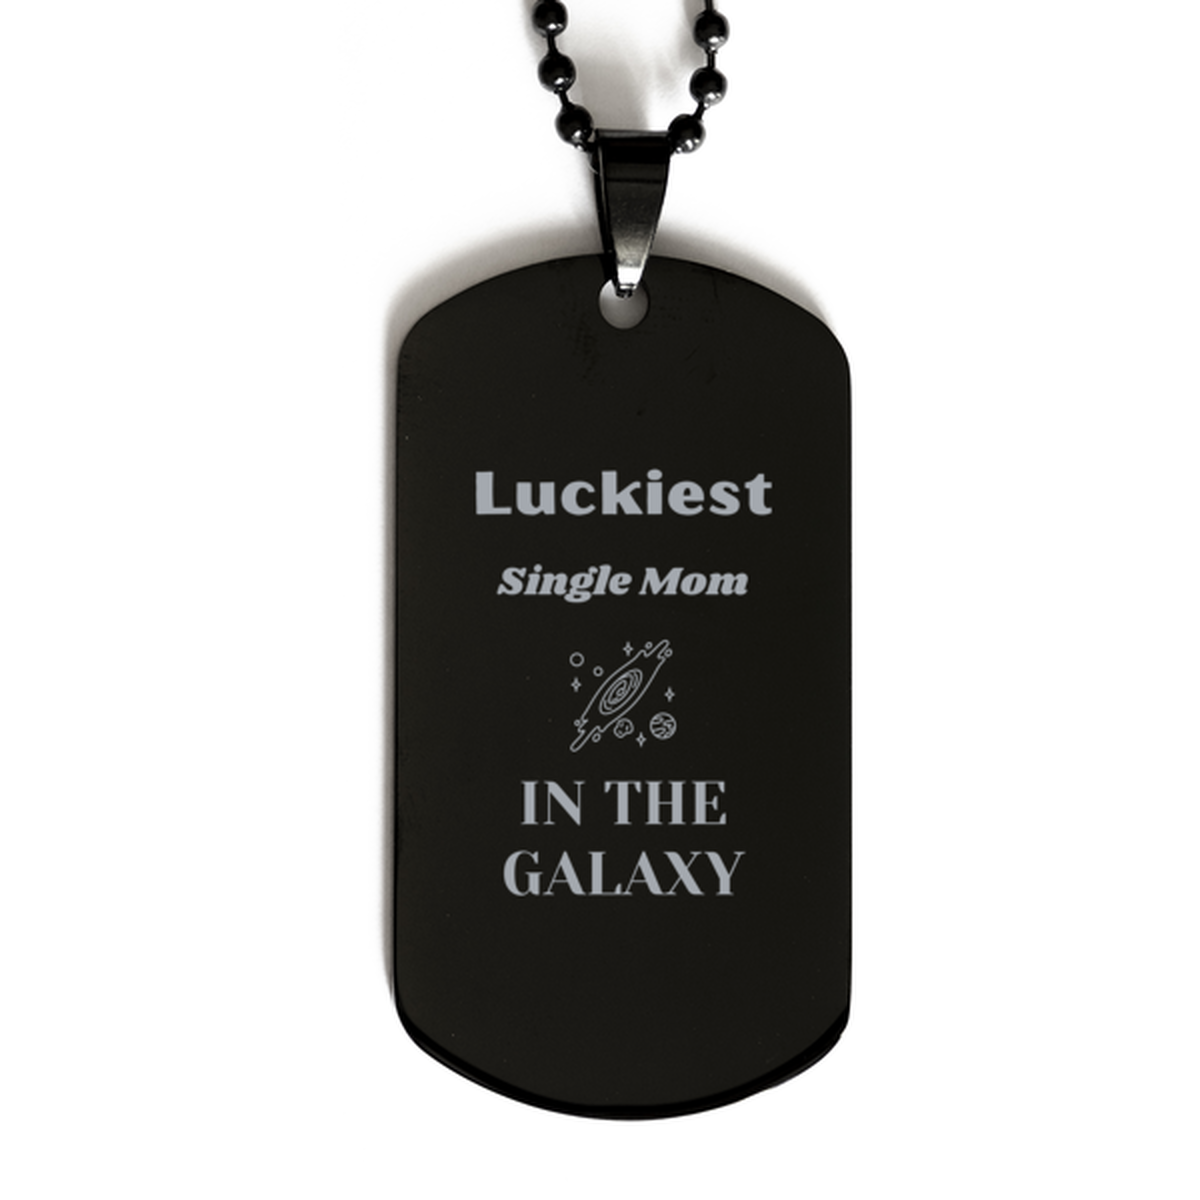 Luckiest Single Mom in the Galaxy, To My Single Mom Engraved Gifts, Christmas Single Mom Black Dog Tag Gifts, X-mas Birthday Unique Gifts For Single Mom Men Women